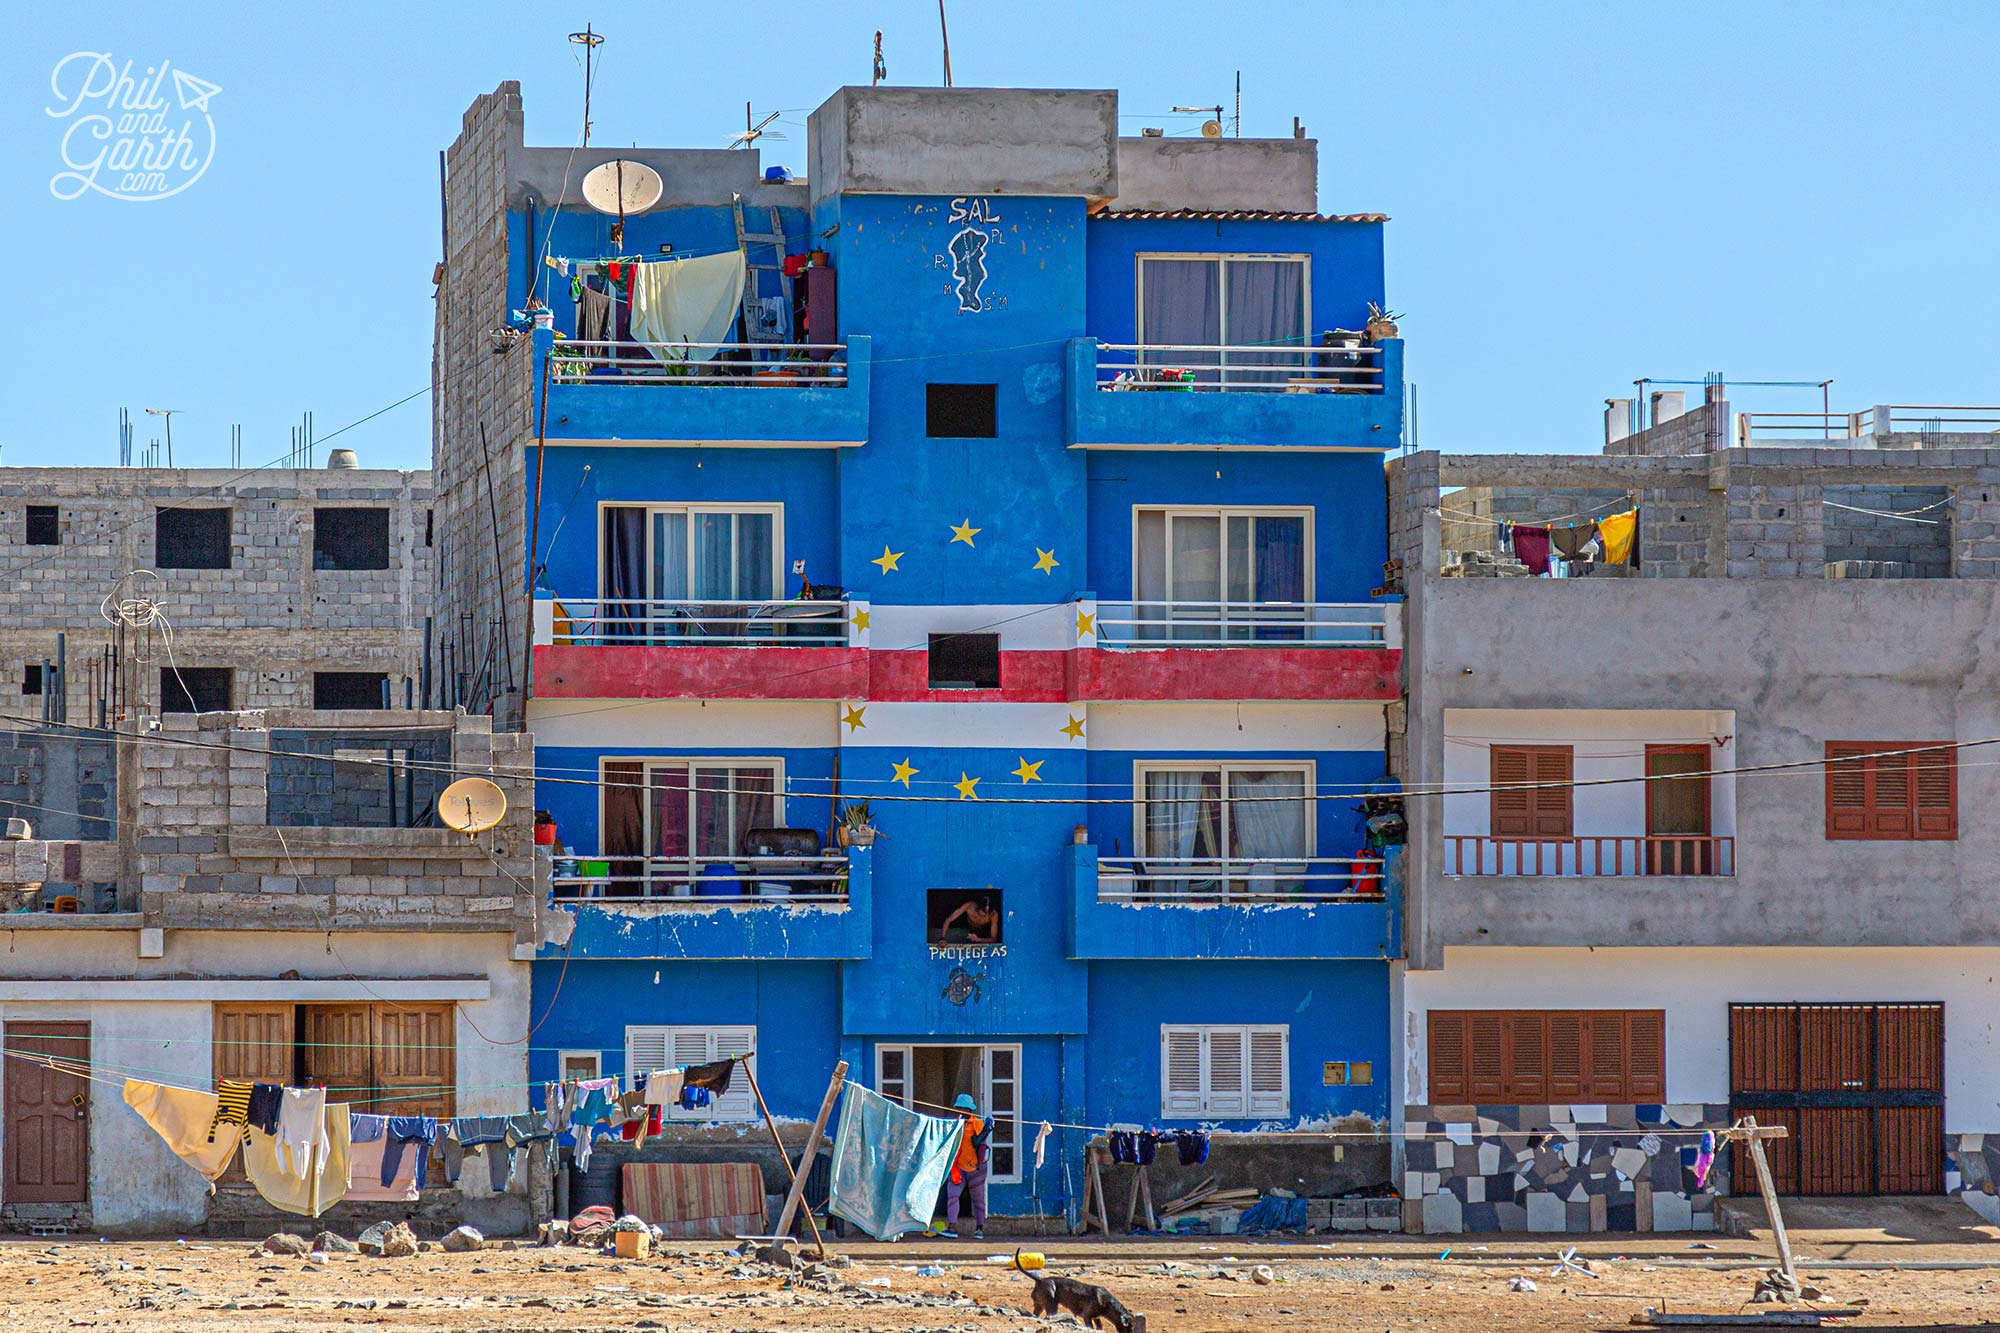 An apartment block with a mural of the Cape Verde flag